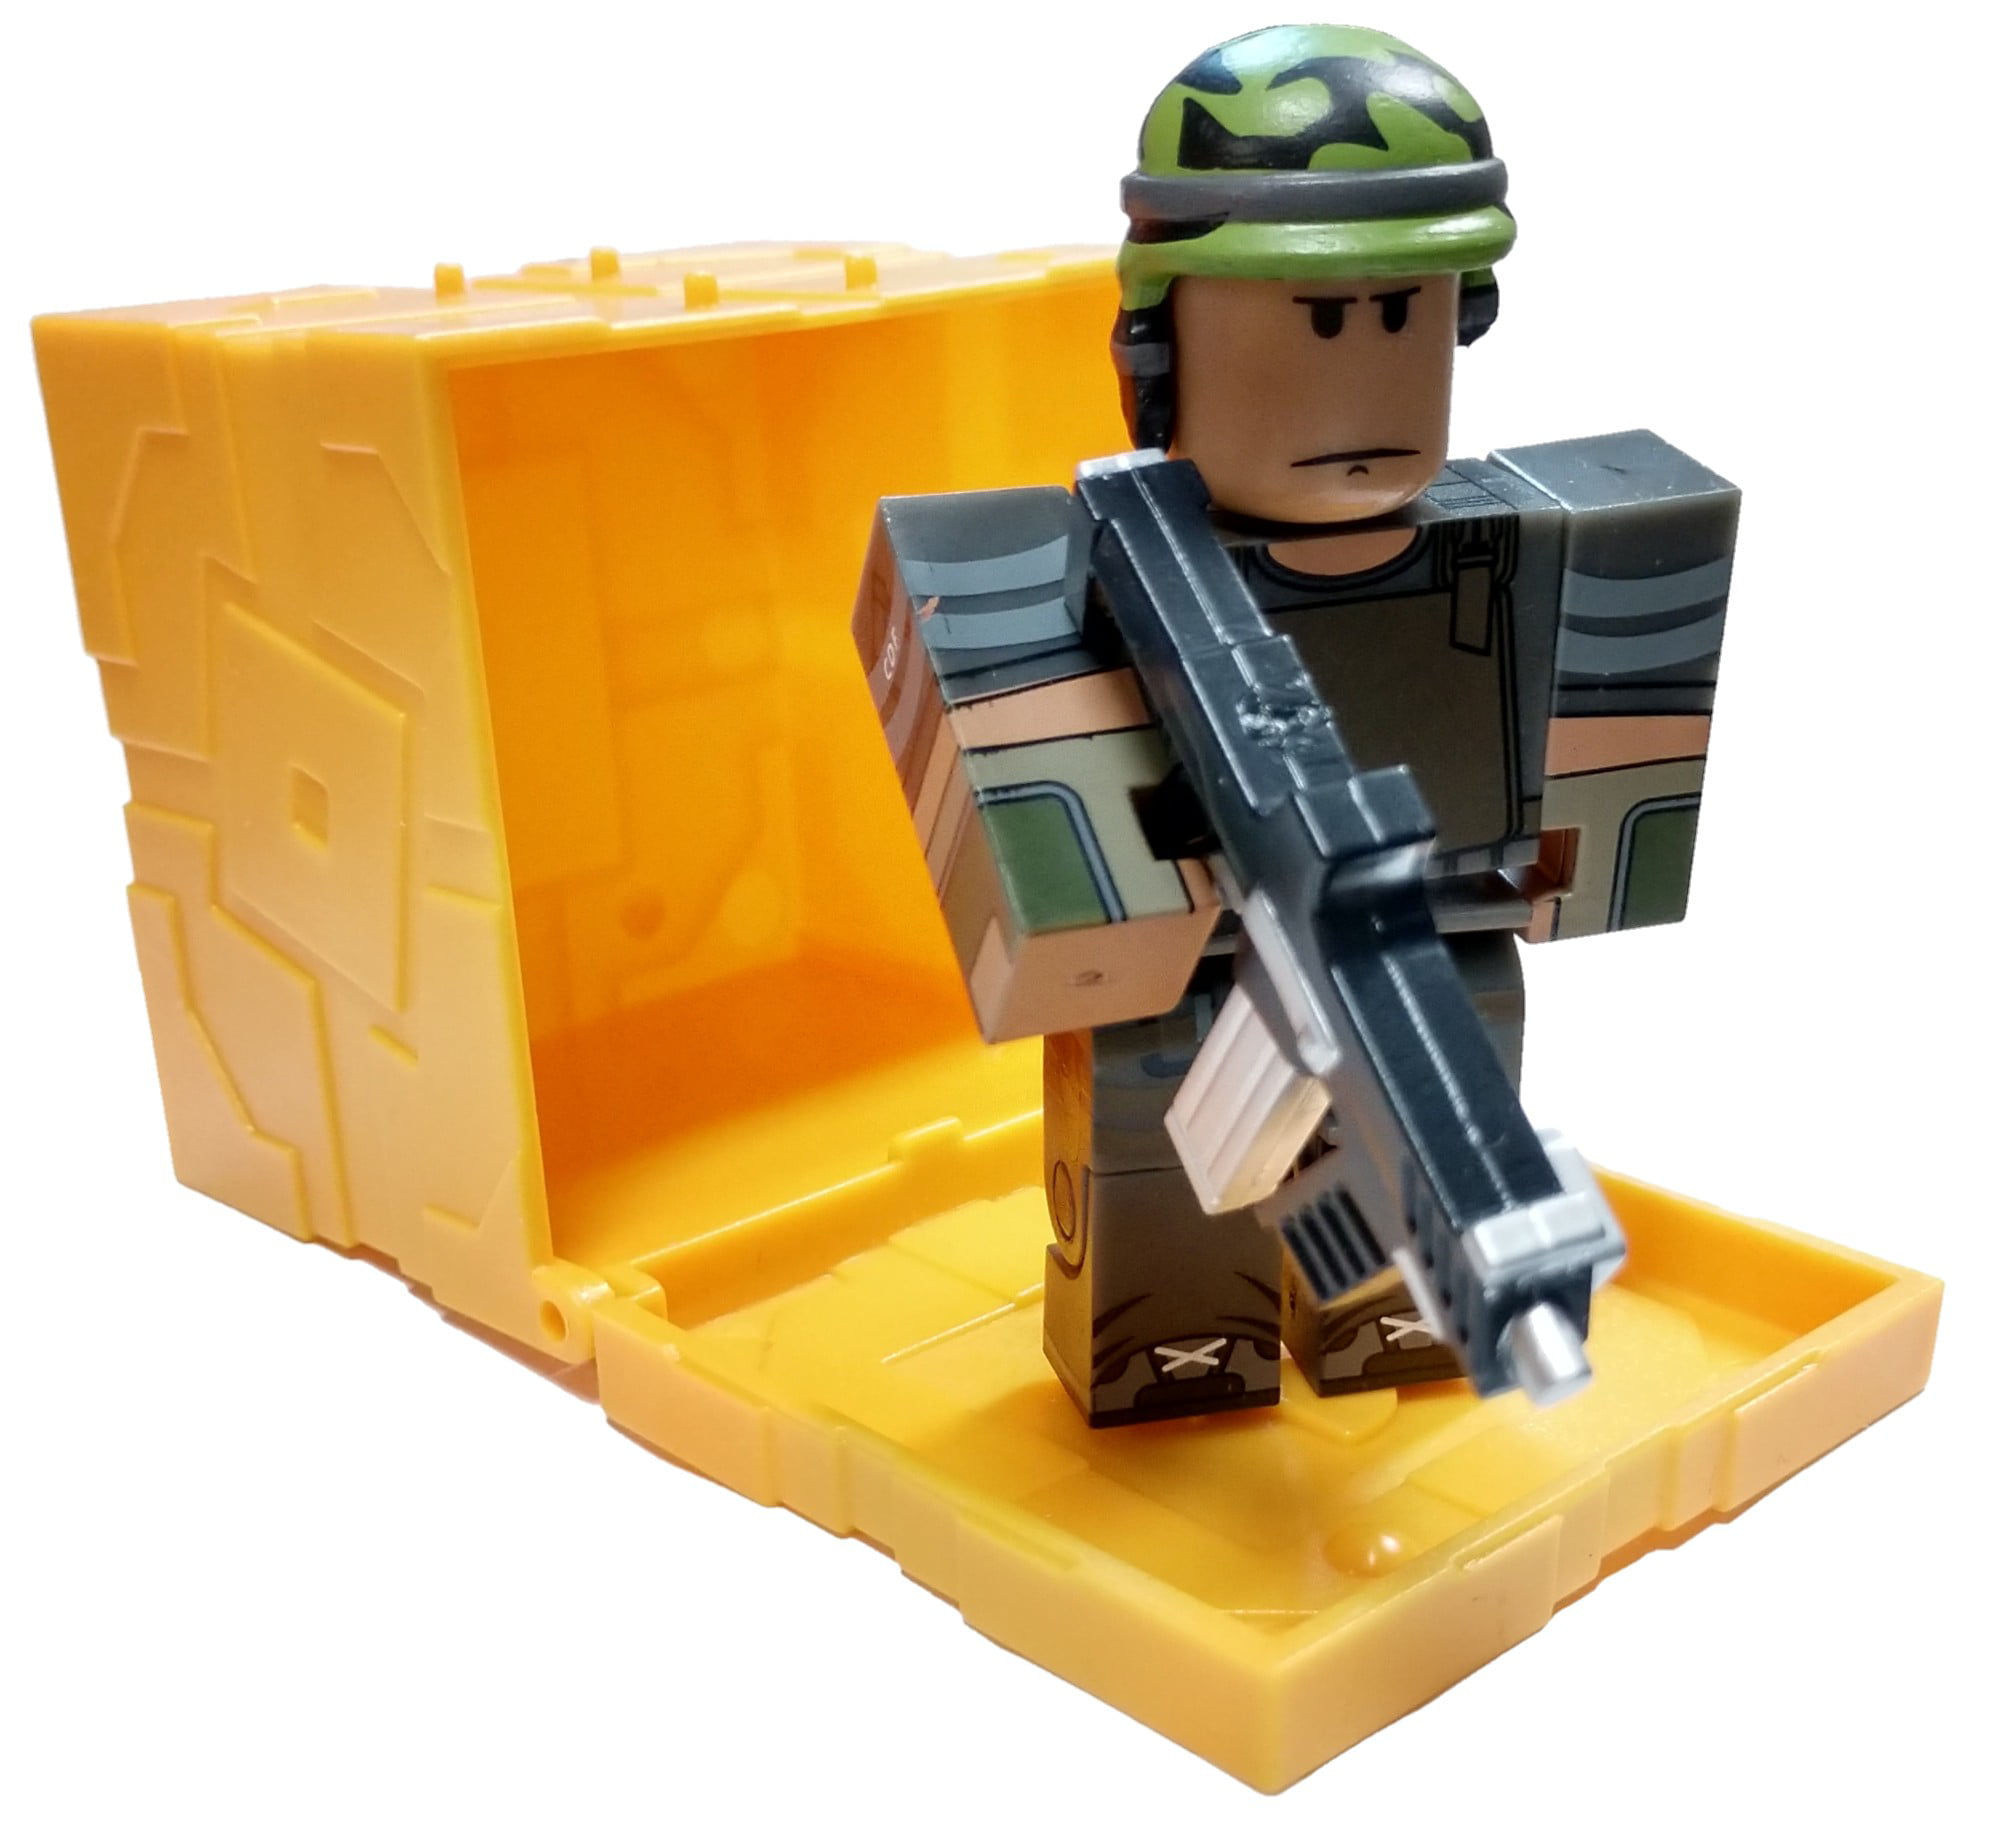 Codes For Roblox From Roblox Toys